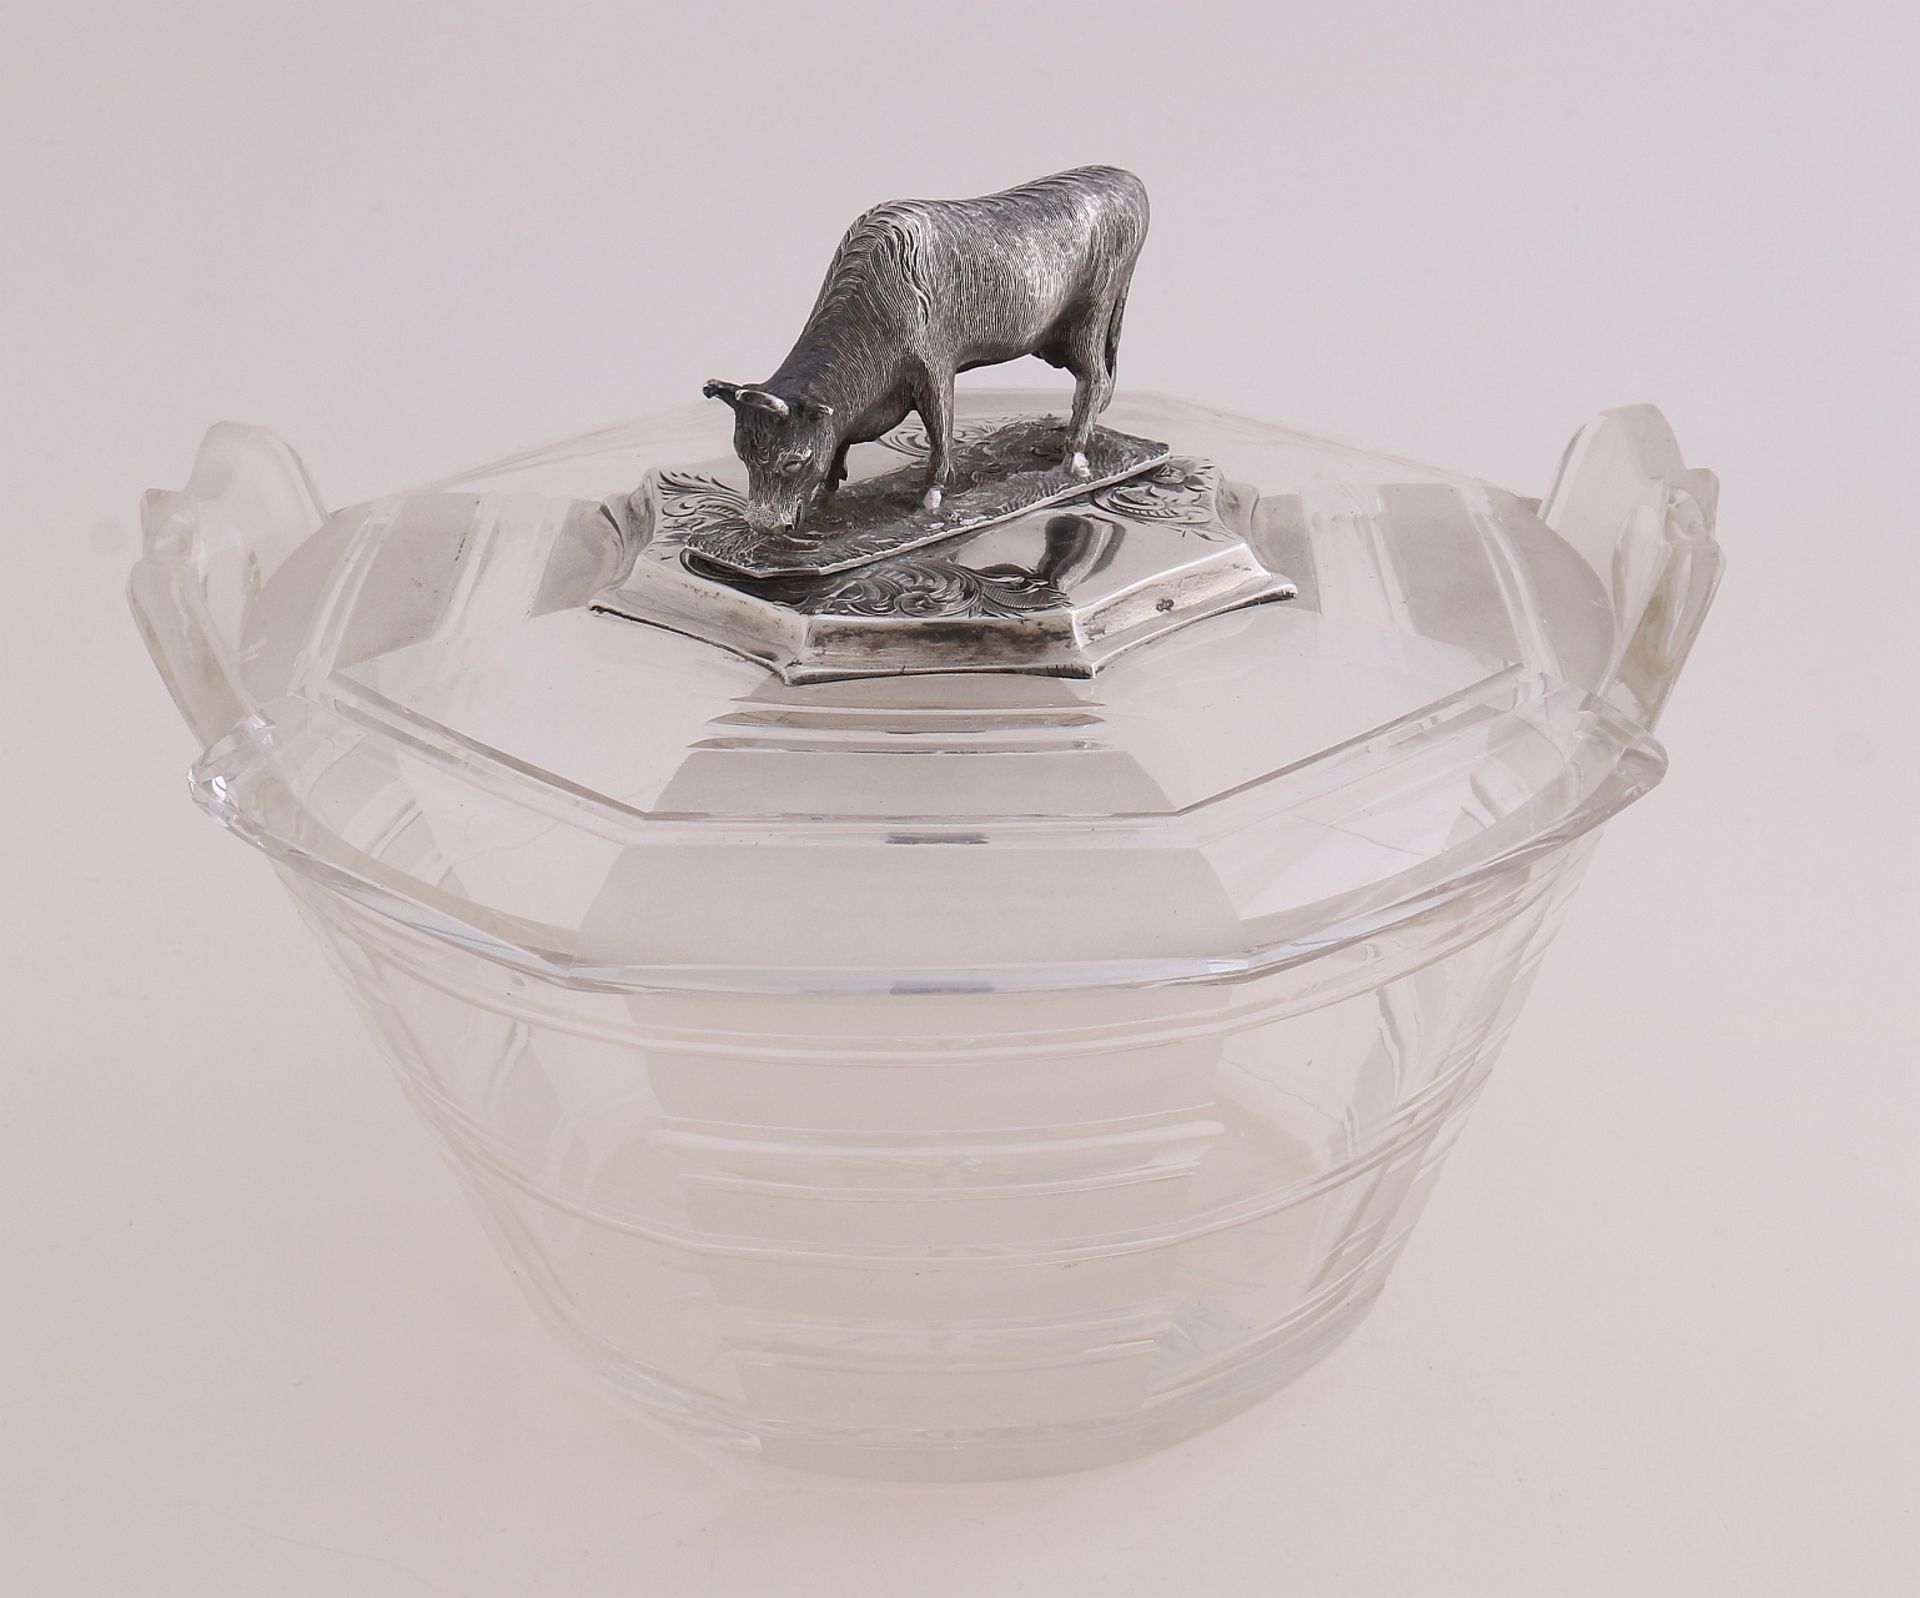 Crystal butter dish with silverware